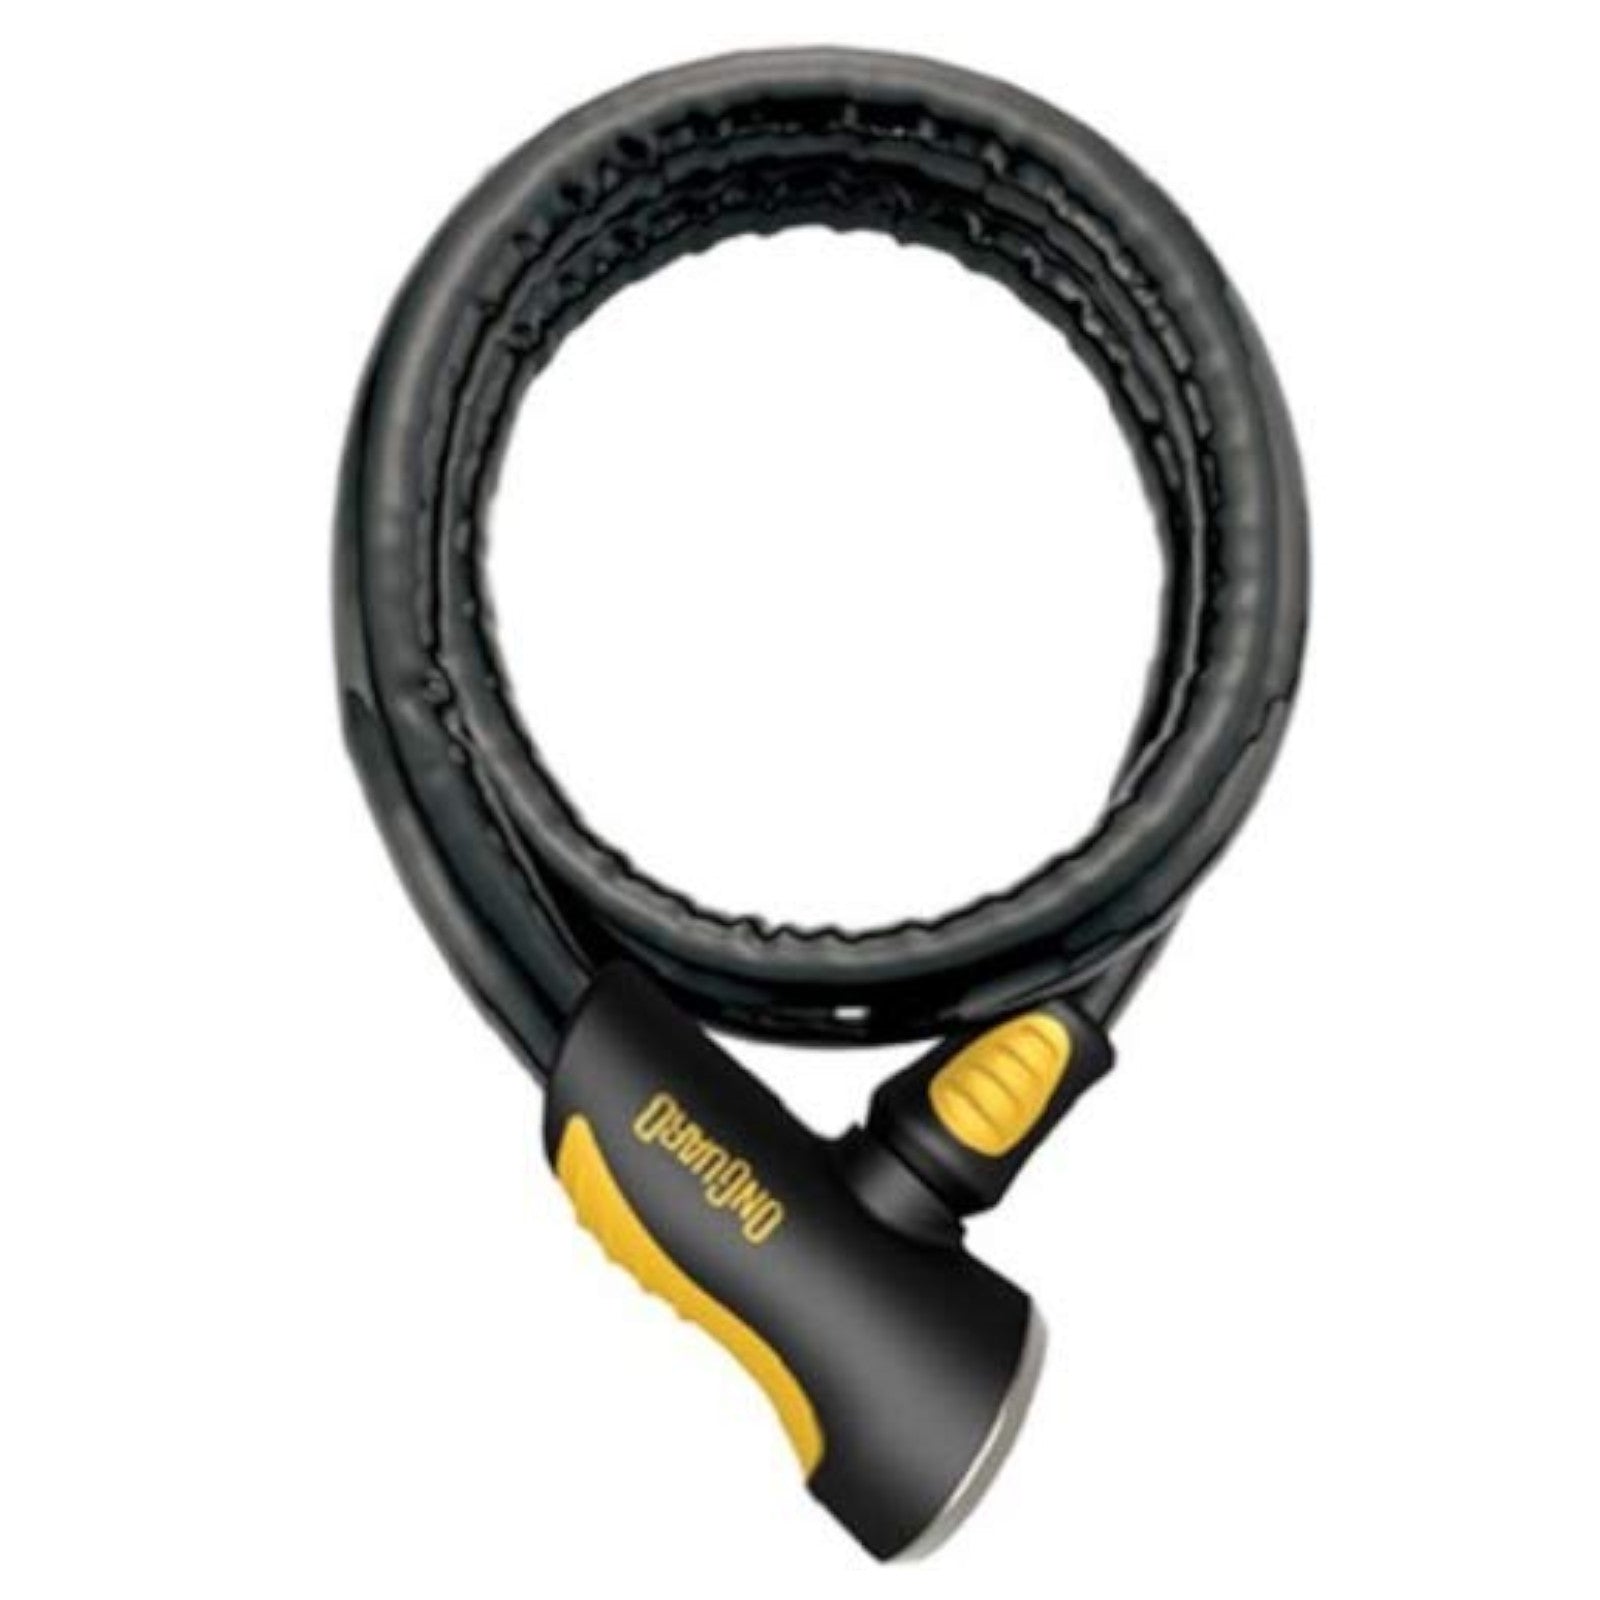 Onguard Rottweiller 8025 Armoured Bike Cable Lock